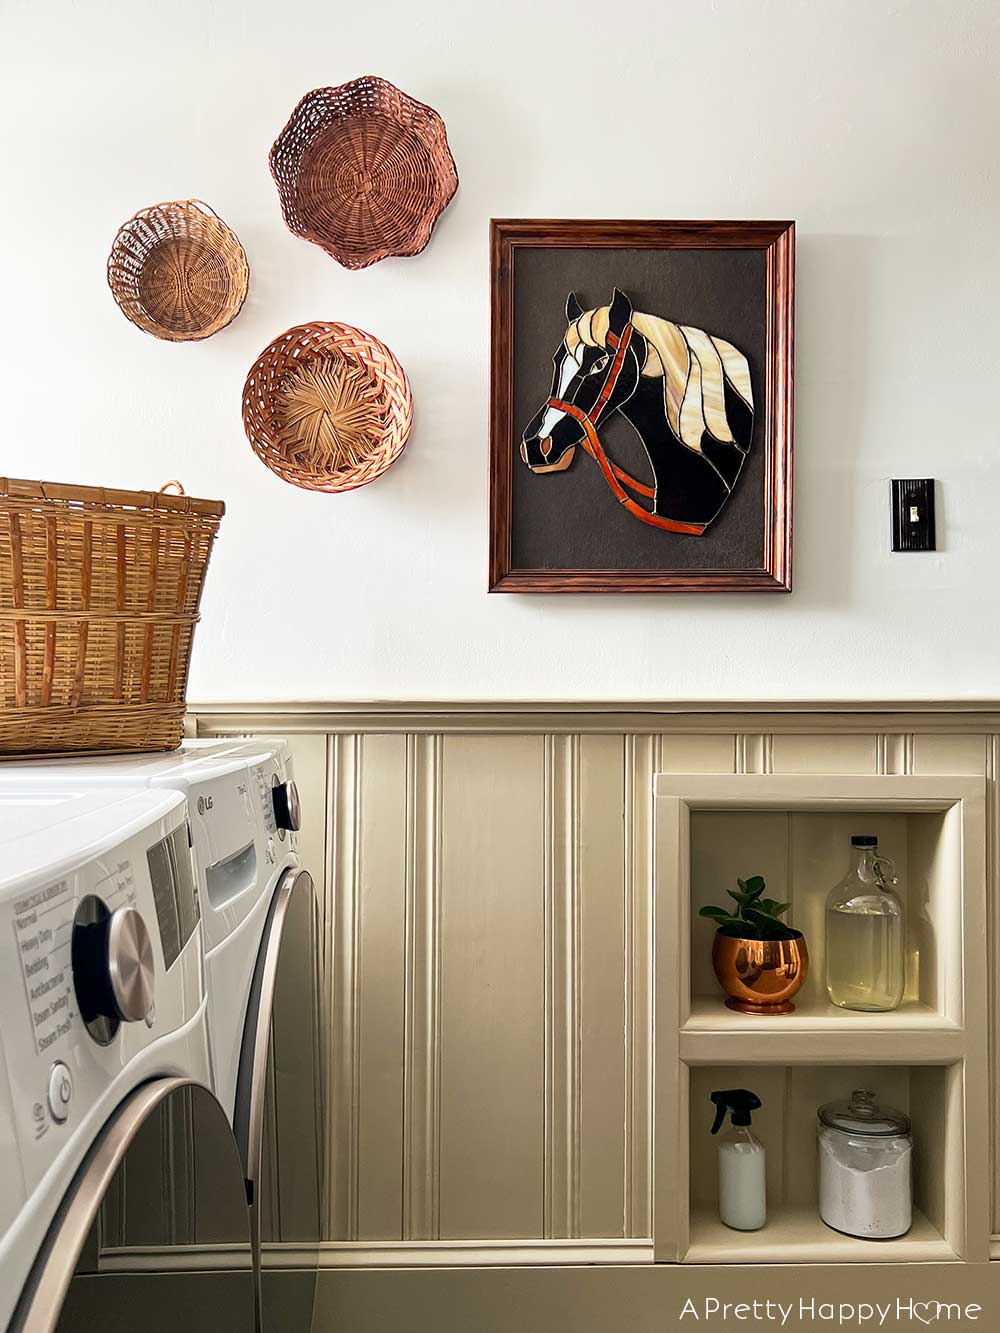 Colonial Farmhouse 5 Year Anniversary modern country laundry room with light tan wainscoting, horse art, and basket wall with built in niche.